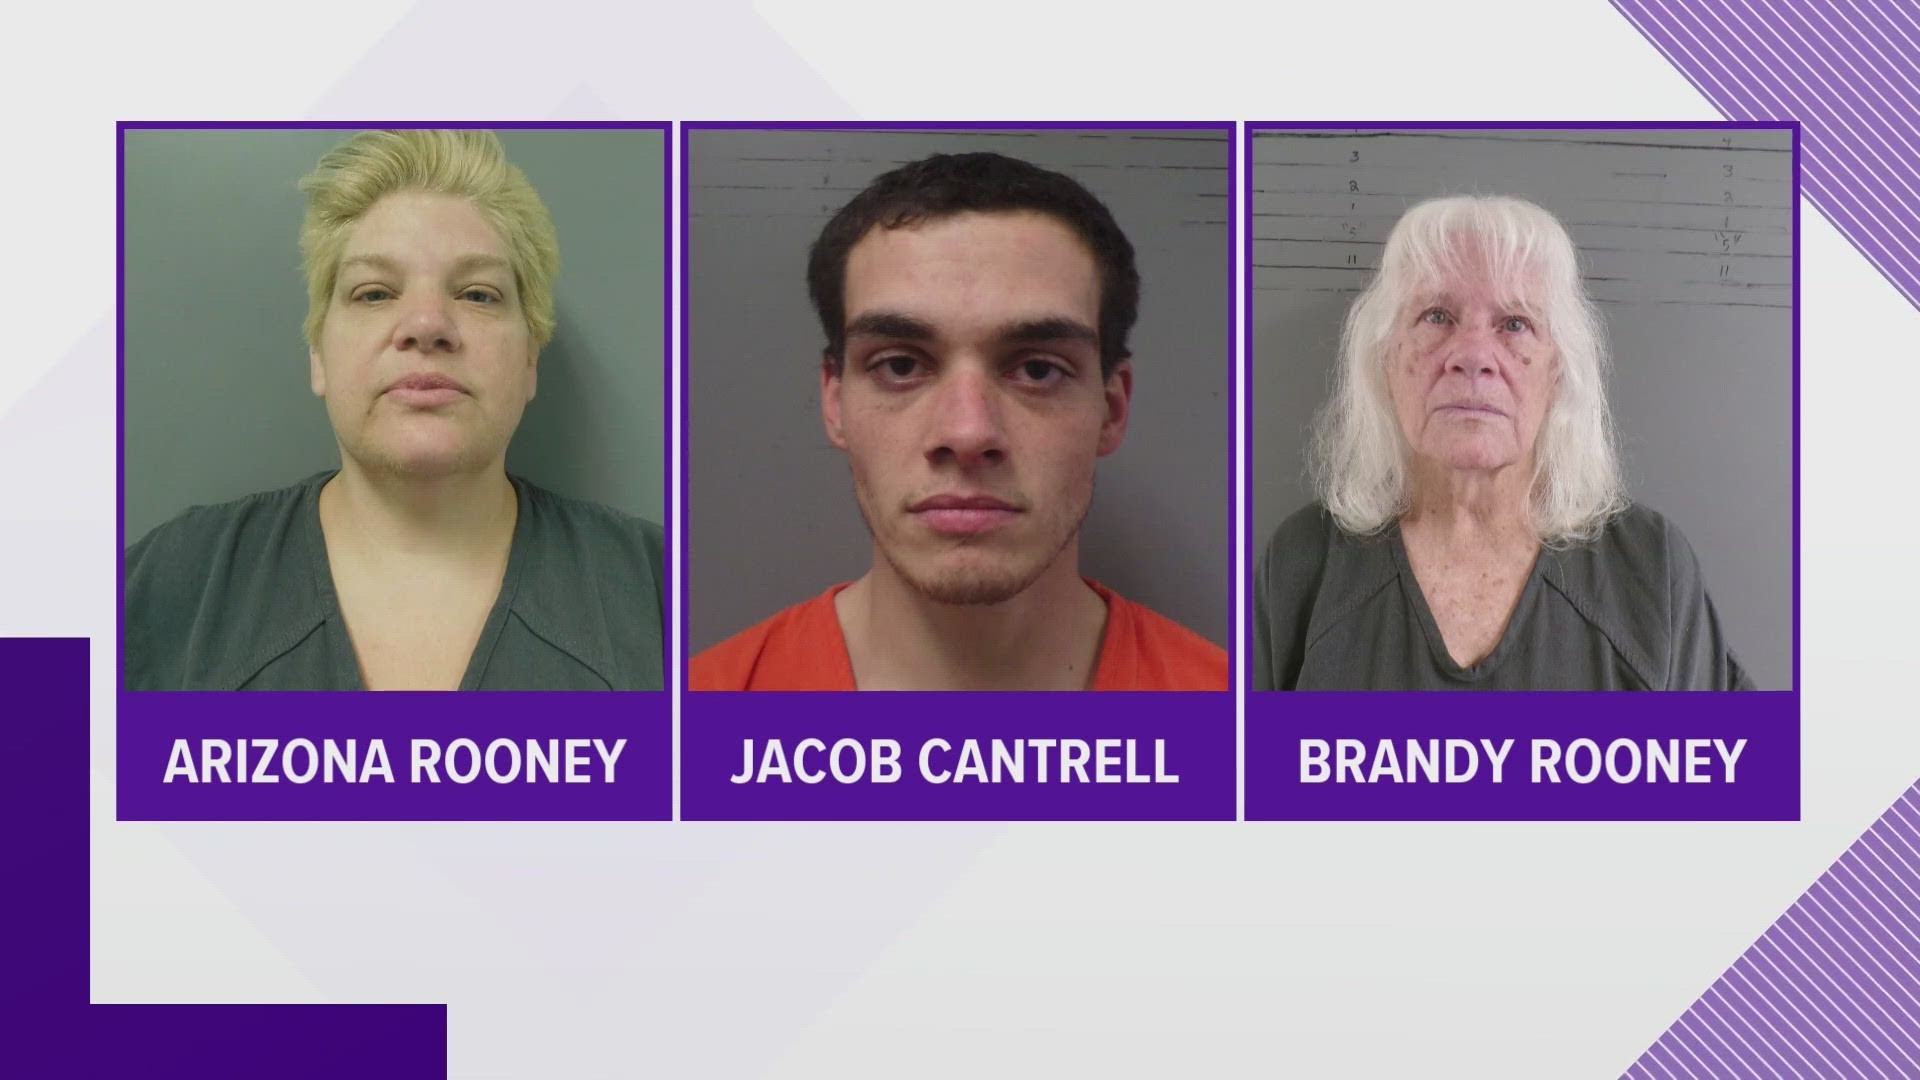 43-year-old Arizona Rooney, her boyfriend 23-year-old Jacob Cantrell and 76-year-old Brandy Rooney have all been arrested and charged with Injury to a Child.